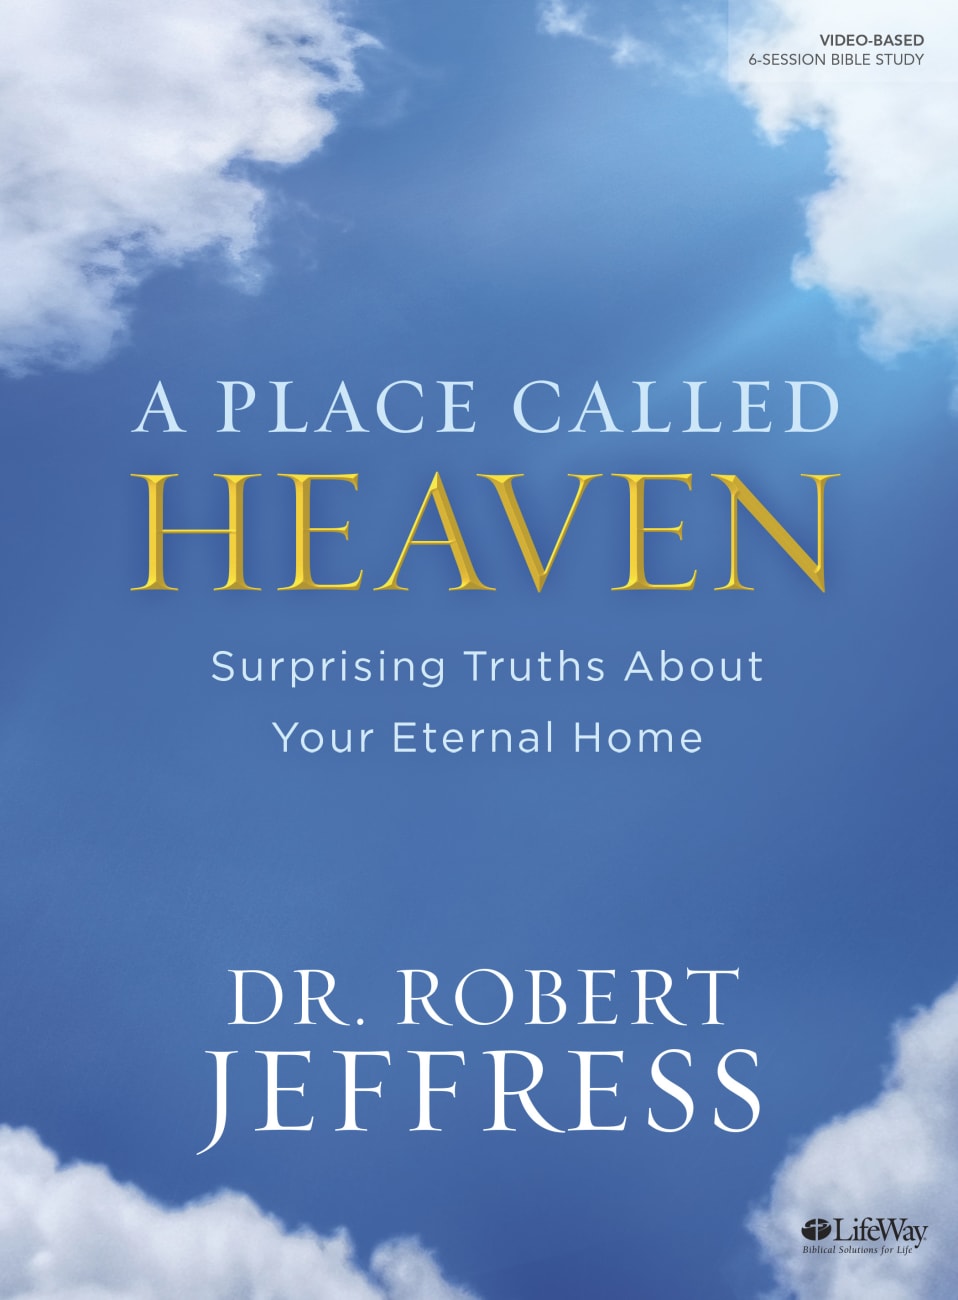 A Place Called Heaven: Surprising Truths About Your Eternal Home (Bible Study Book) Paperback